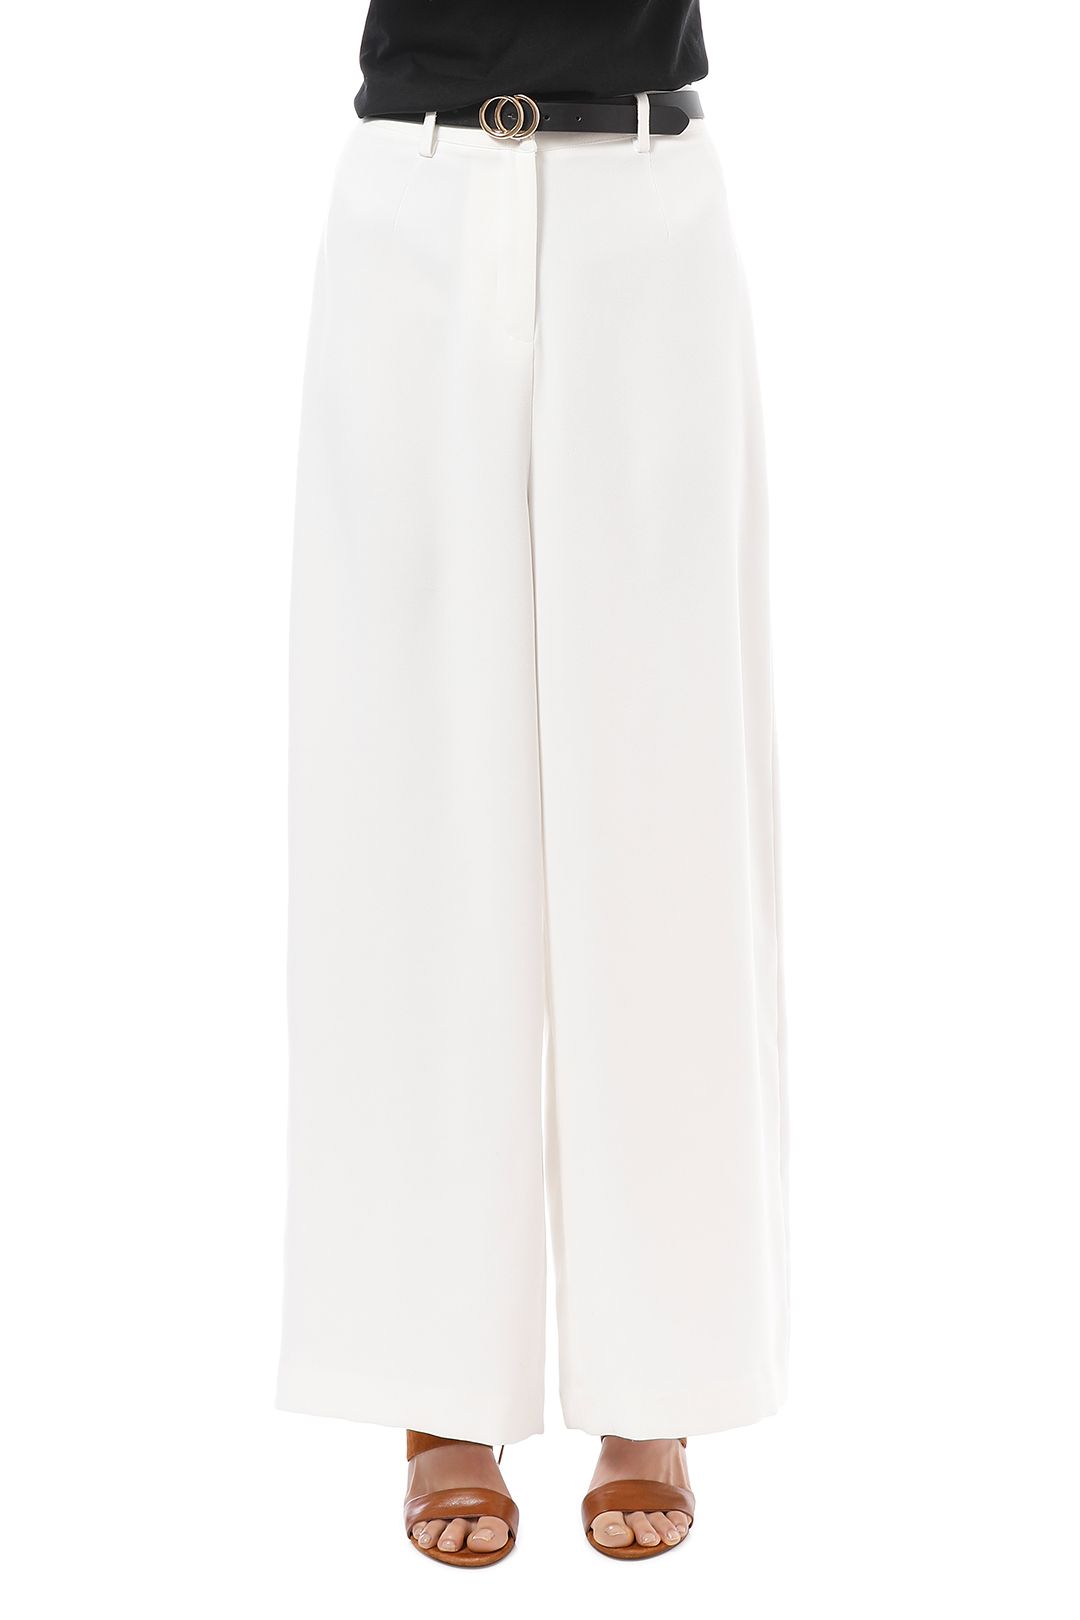 Friend of Audrey - Anya White Palazzo Pants - White - Front Detail